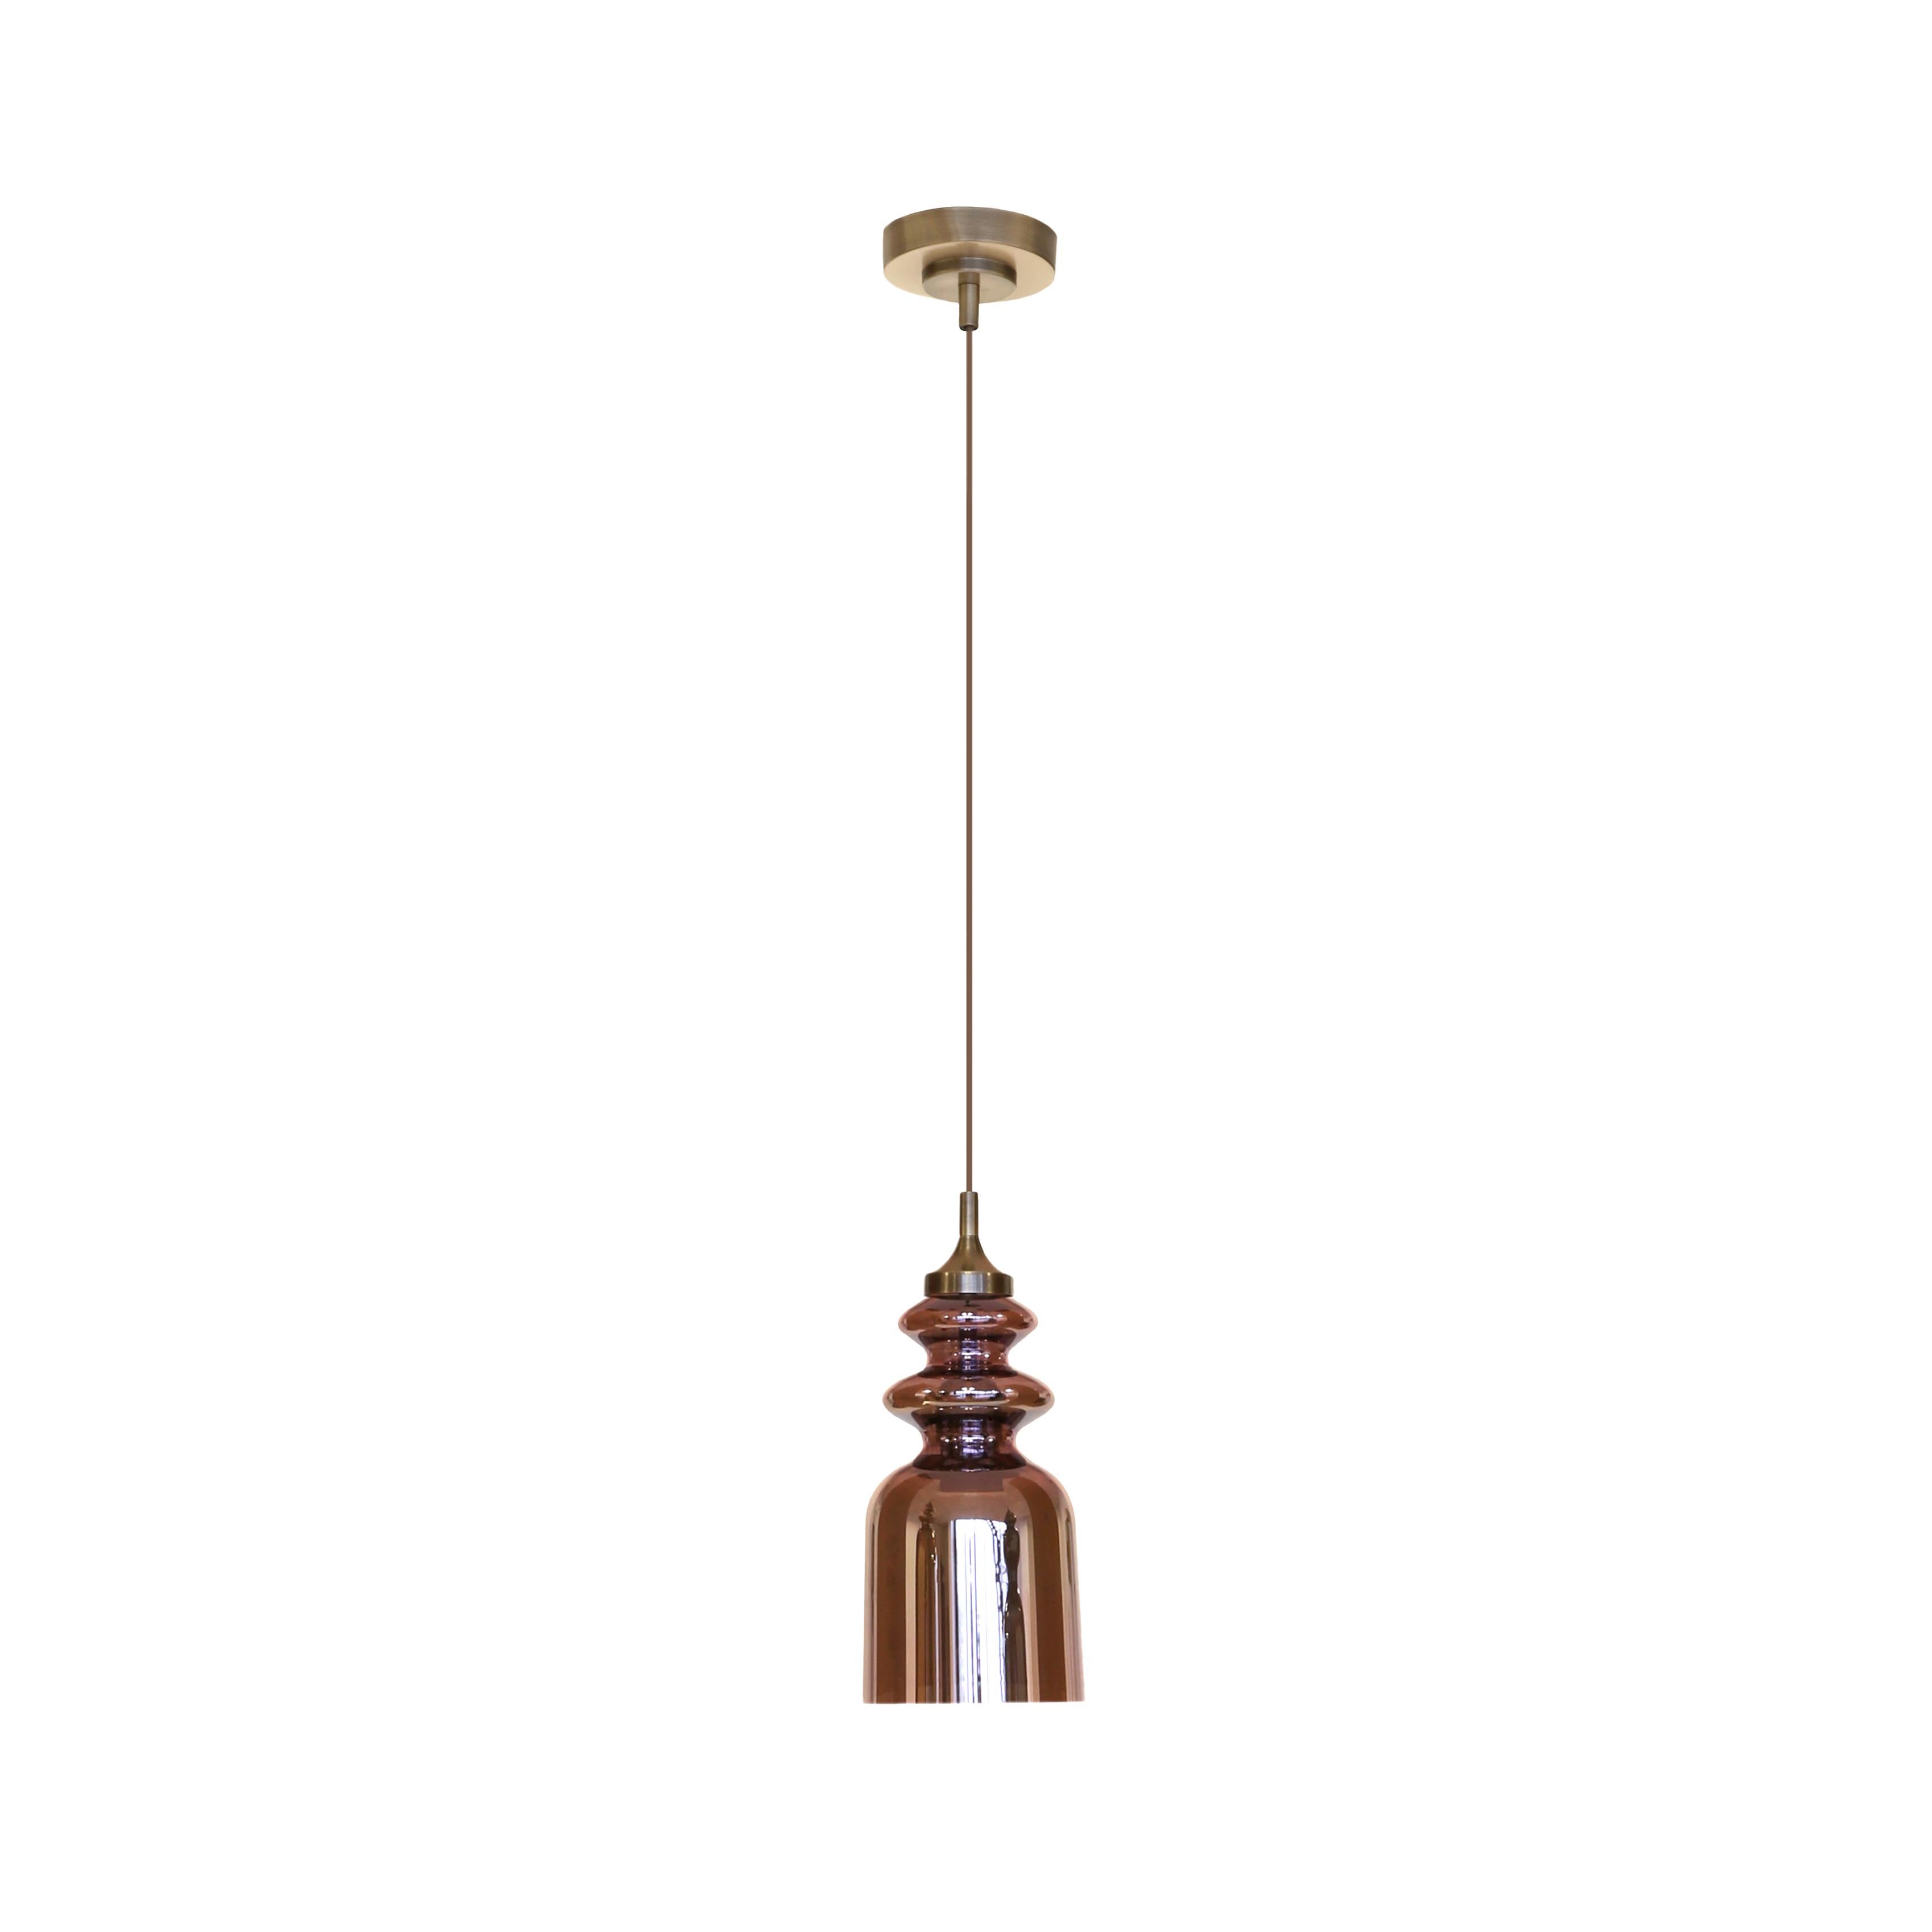 Messalina Suspension Light with Satin Bronze Structure and Antique Pink For Sale